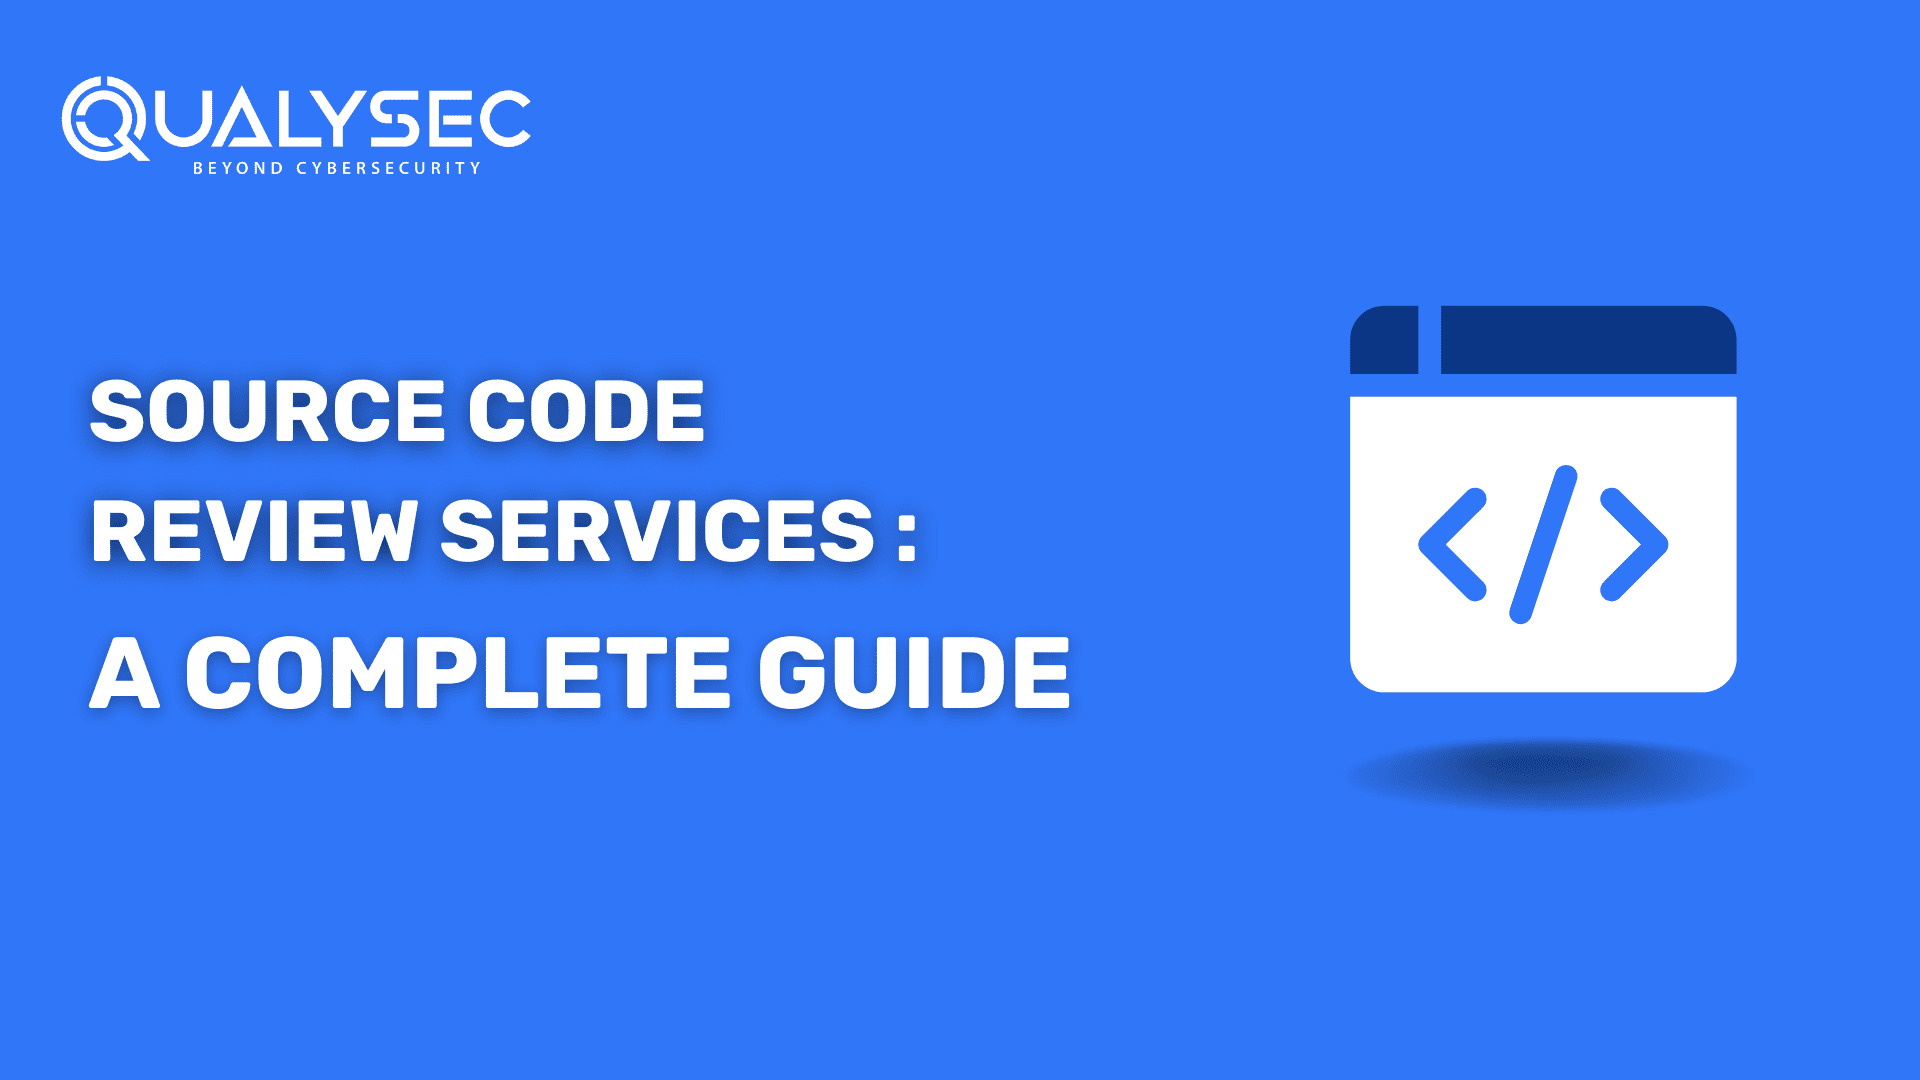 A Complete Guide to Source Code Review Services 2023